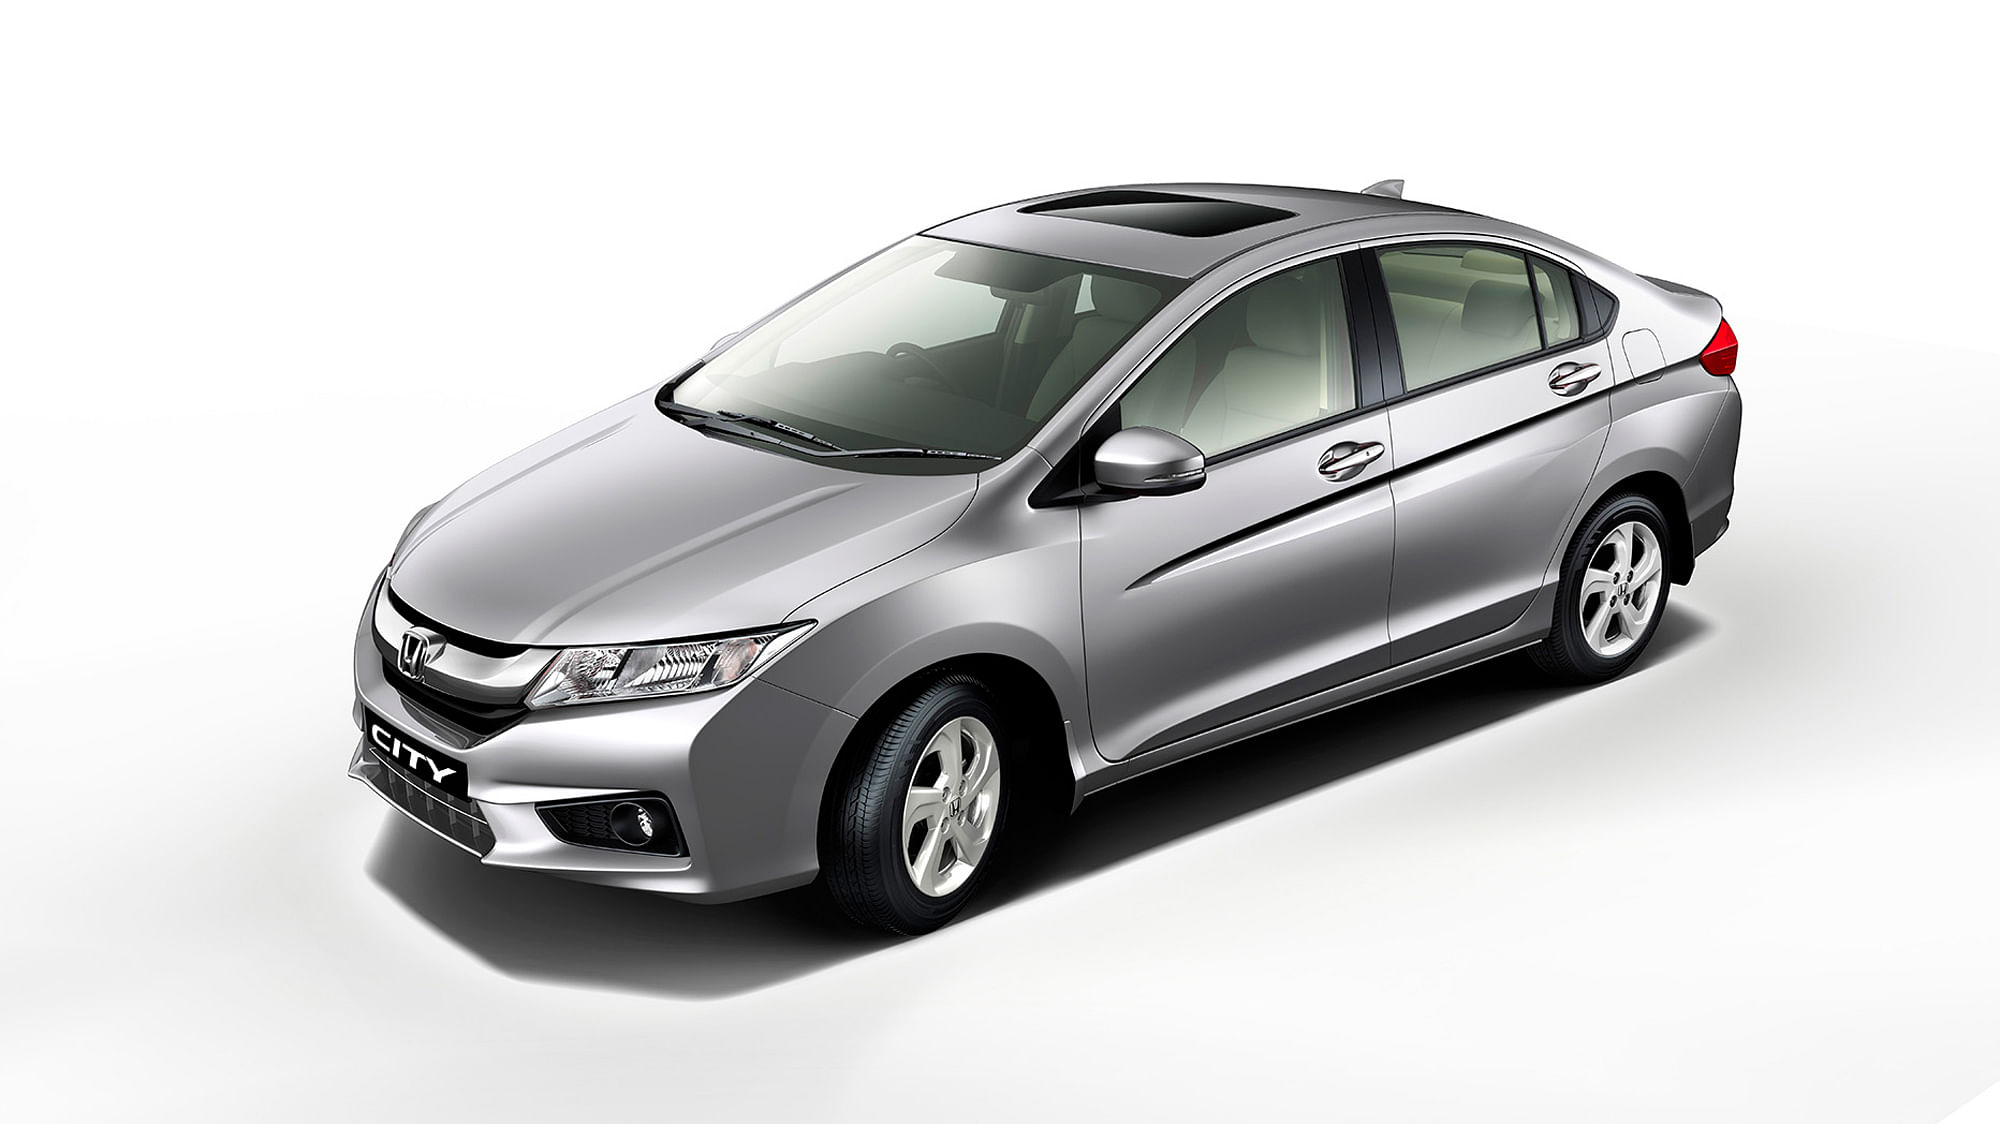 Honda City recalled this week due to safety issues. (Photo Courtesy: Honda India)